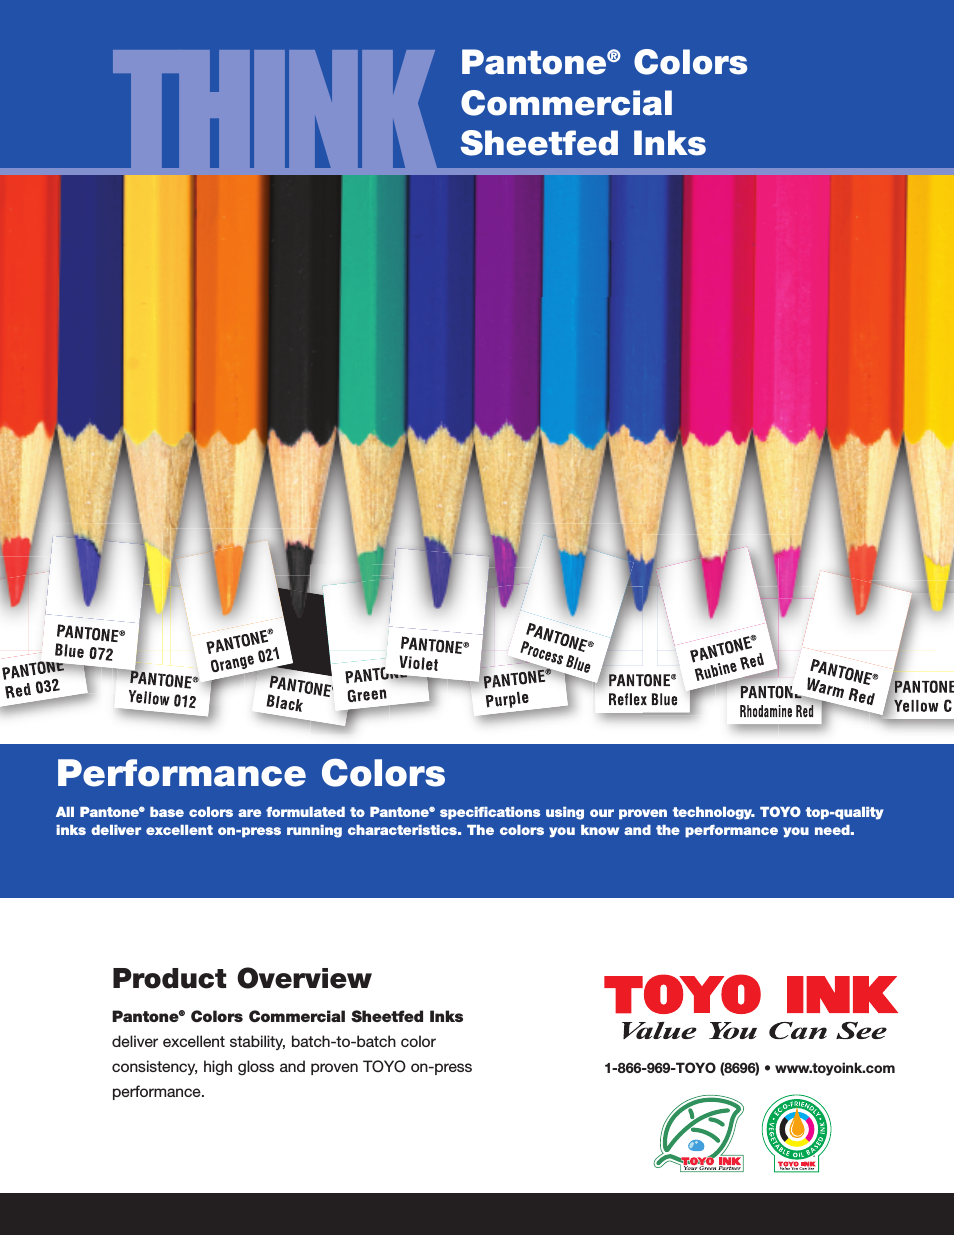 Pantone® Colors Commercial Sheetfed Inks